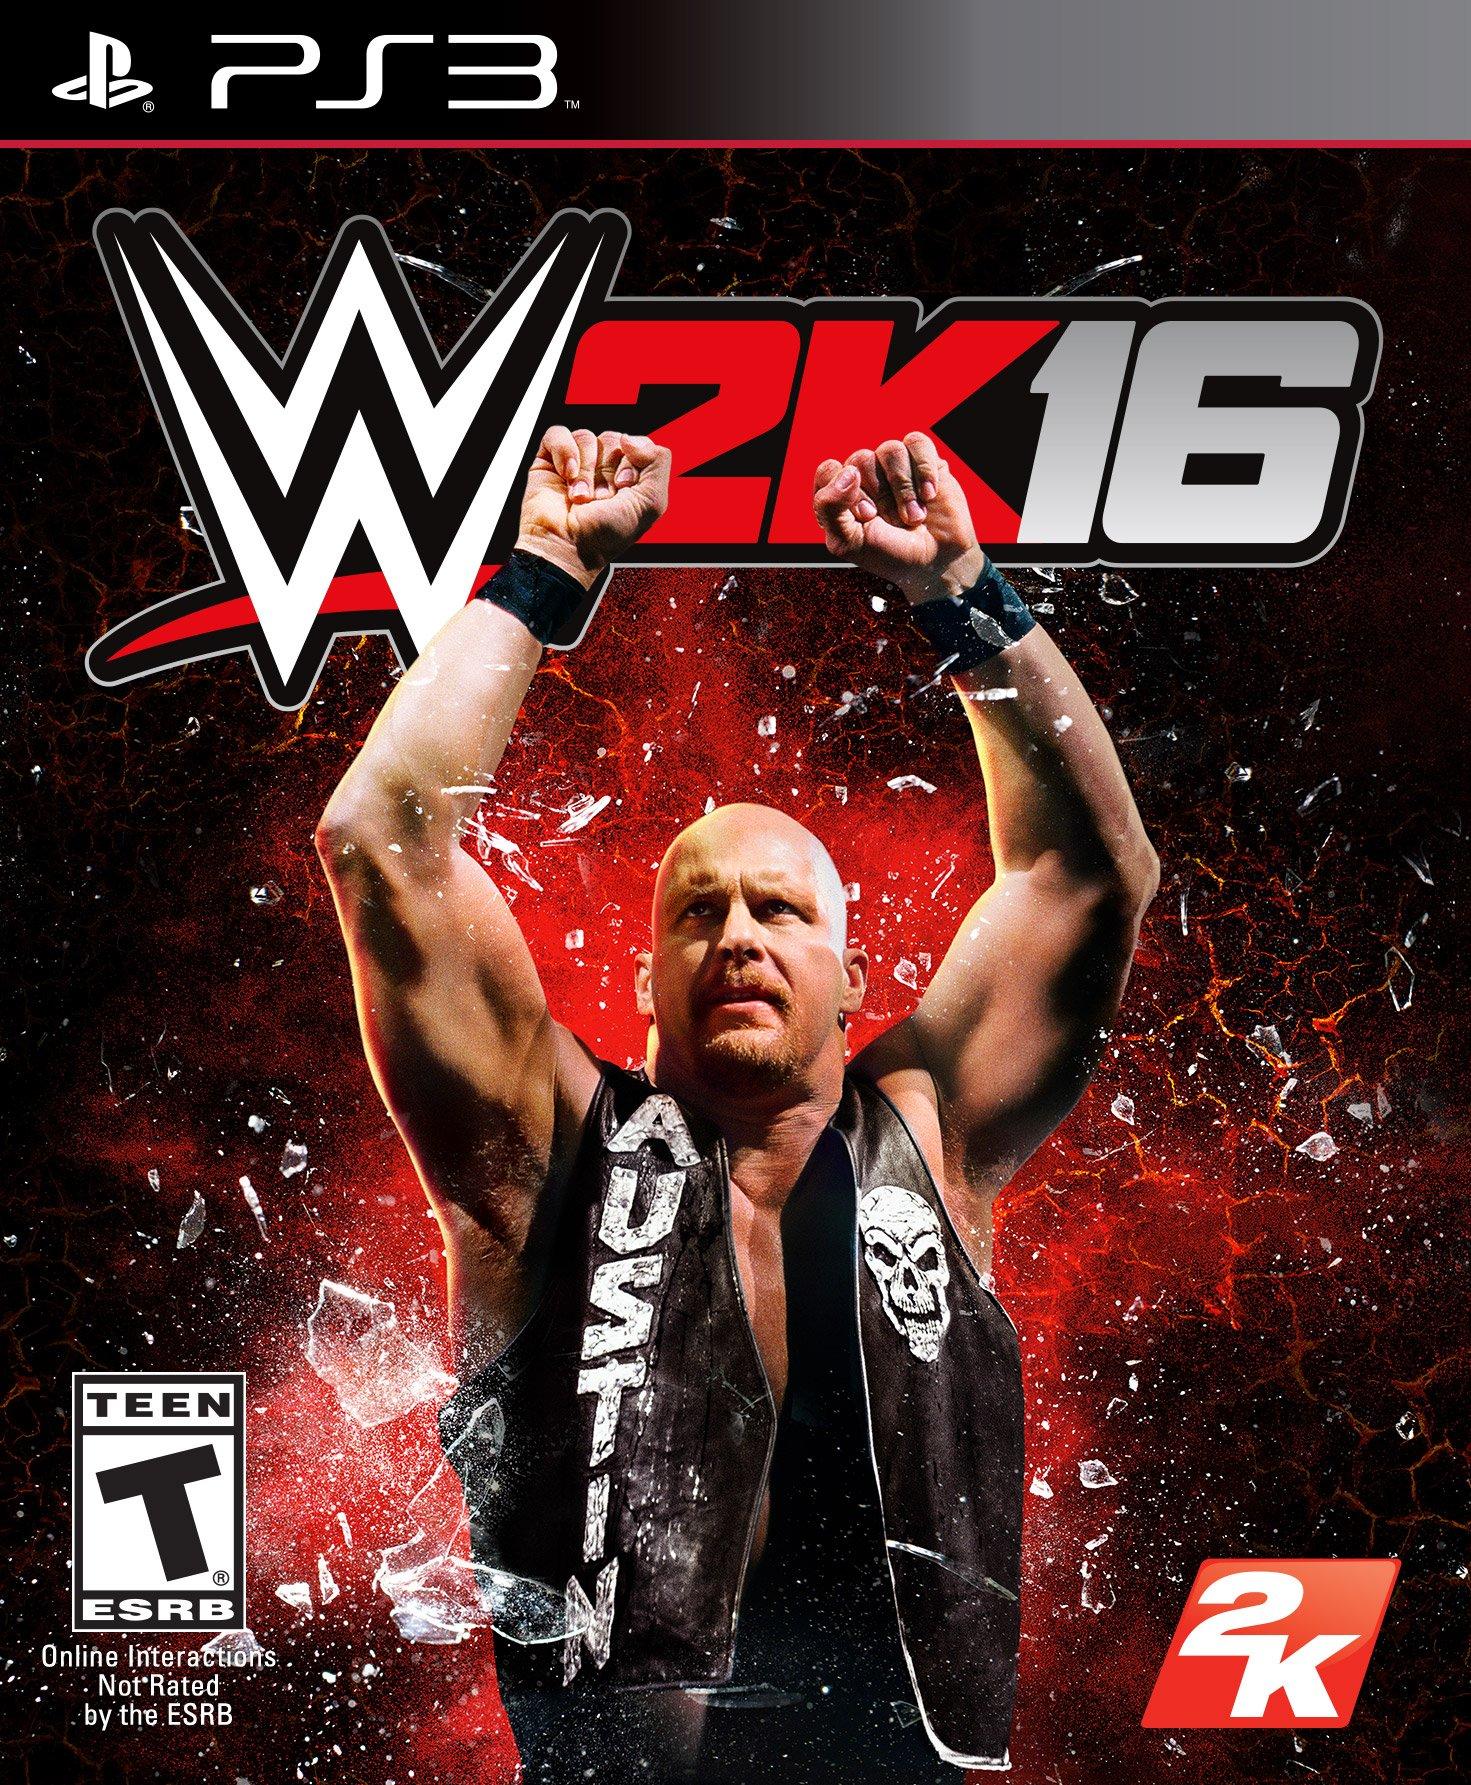 wwe games for ps2 buy online